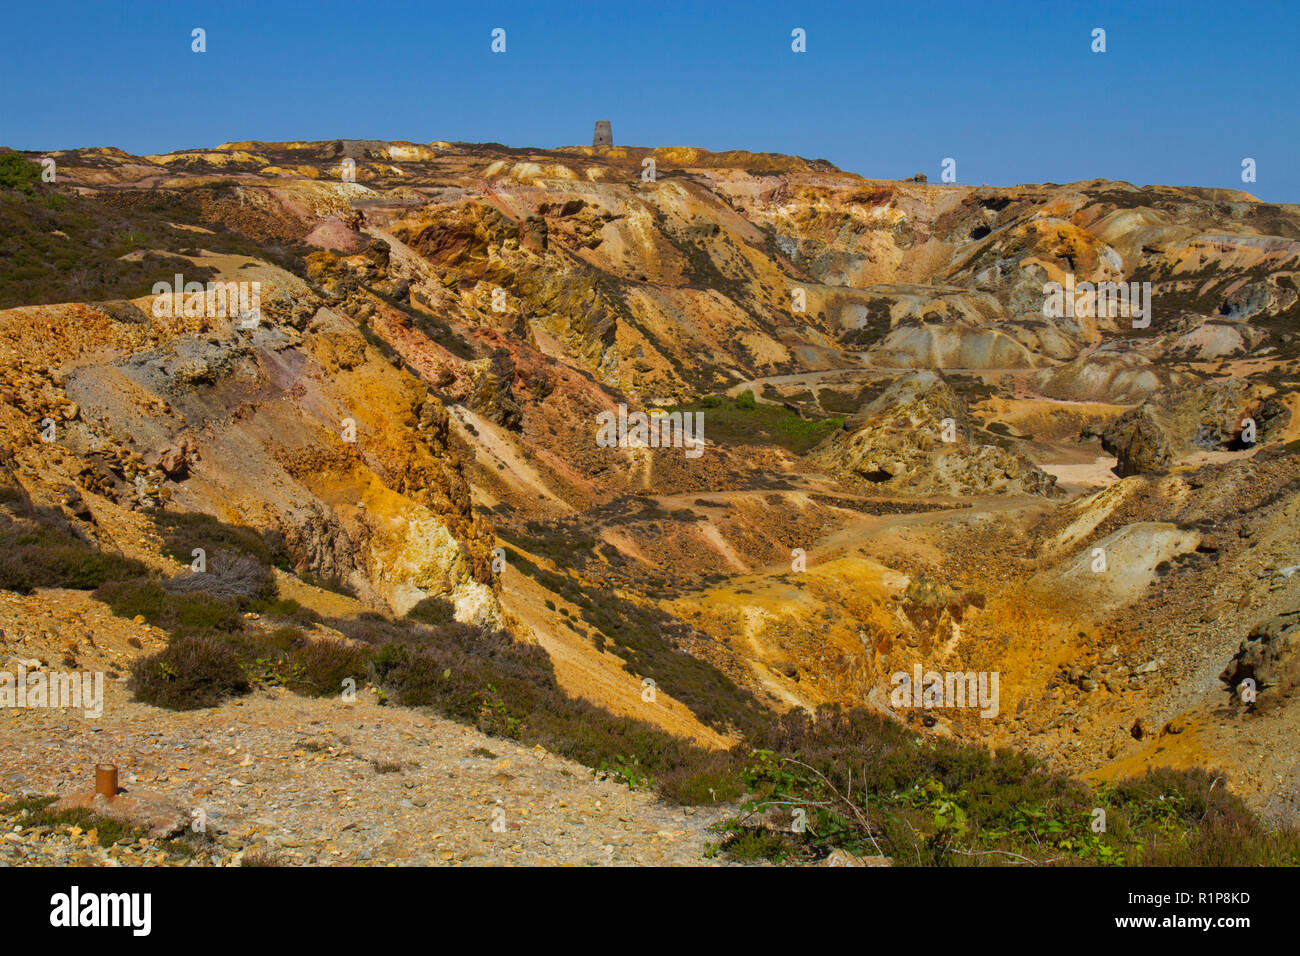 View over the 'Great opencast' pit at Parys Mountain copper mine, Amlwch, Anglsey, Wales. July. Stock Photo